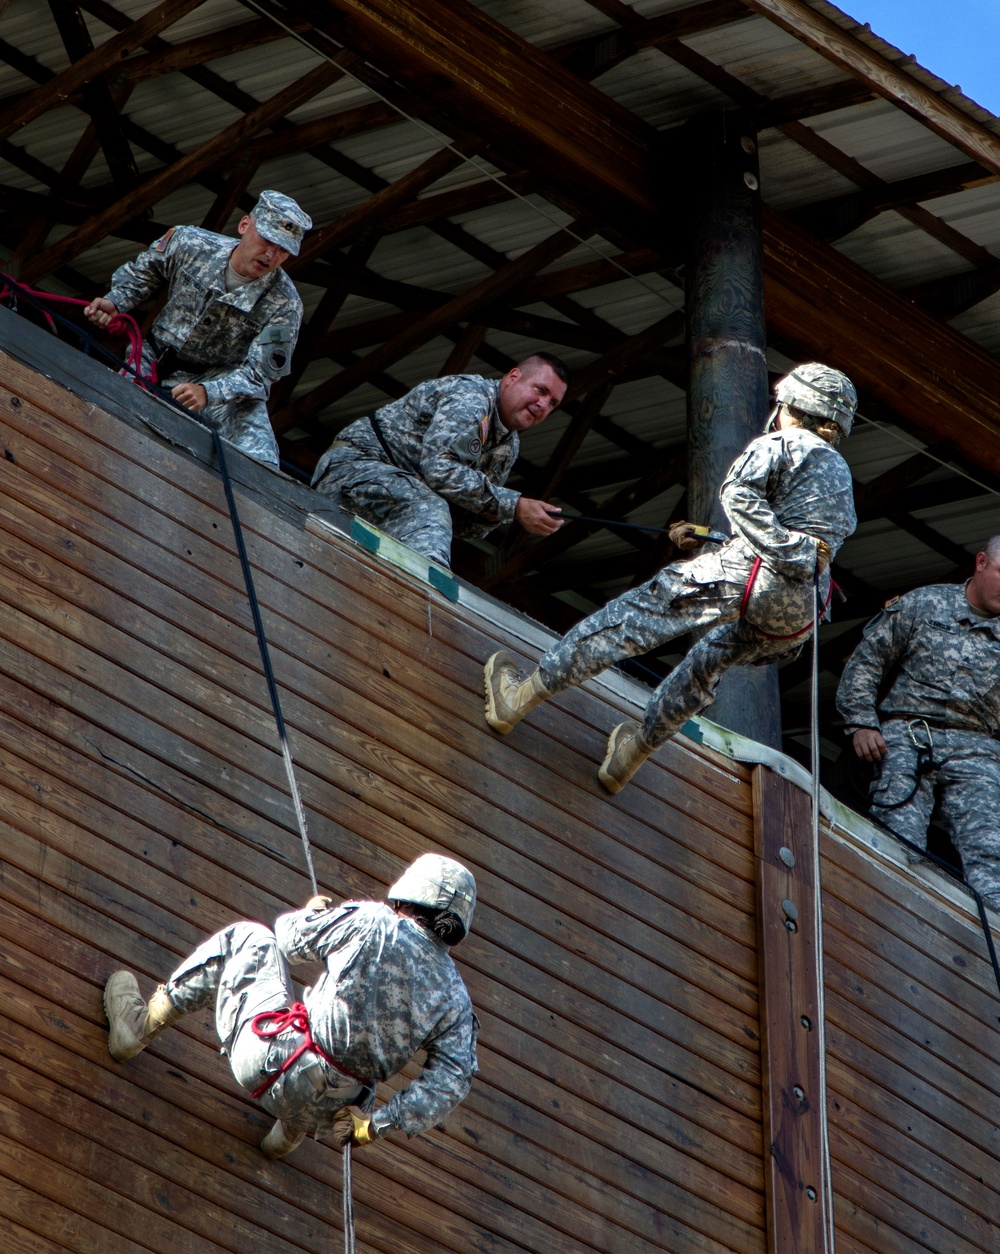 Cadet Initial Entry Training candidates rappel the tower with Task Force Wolf